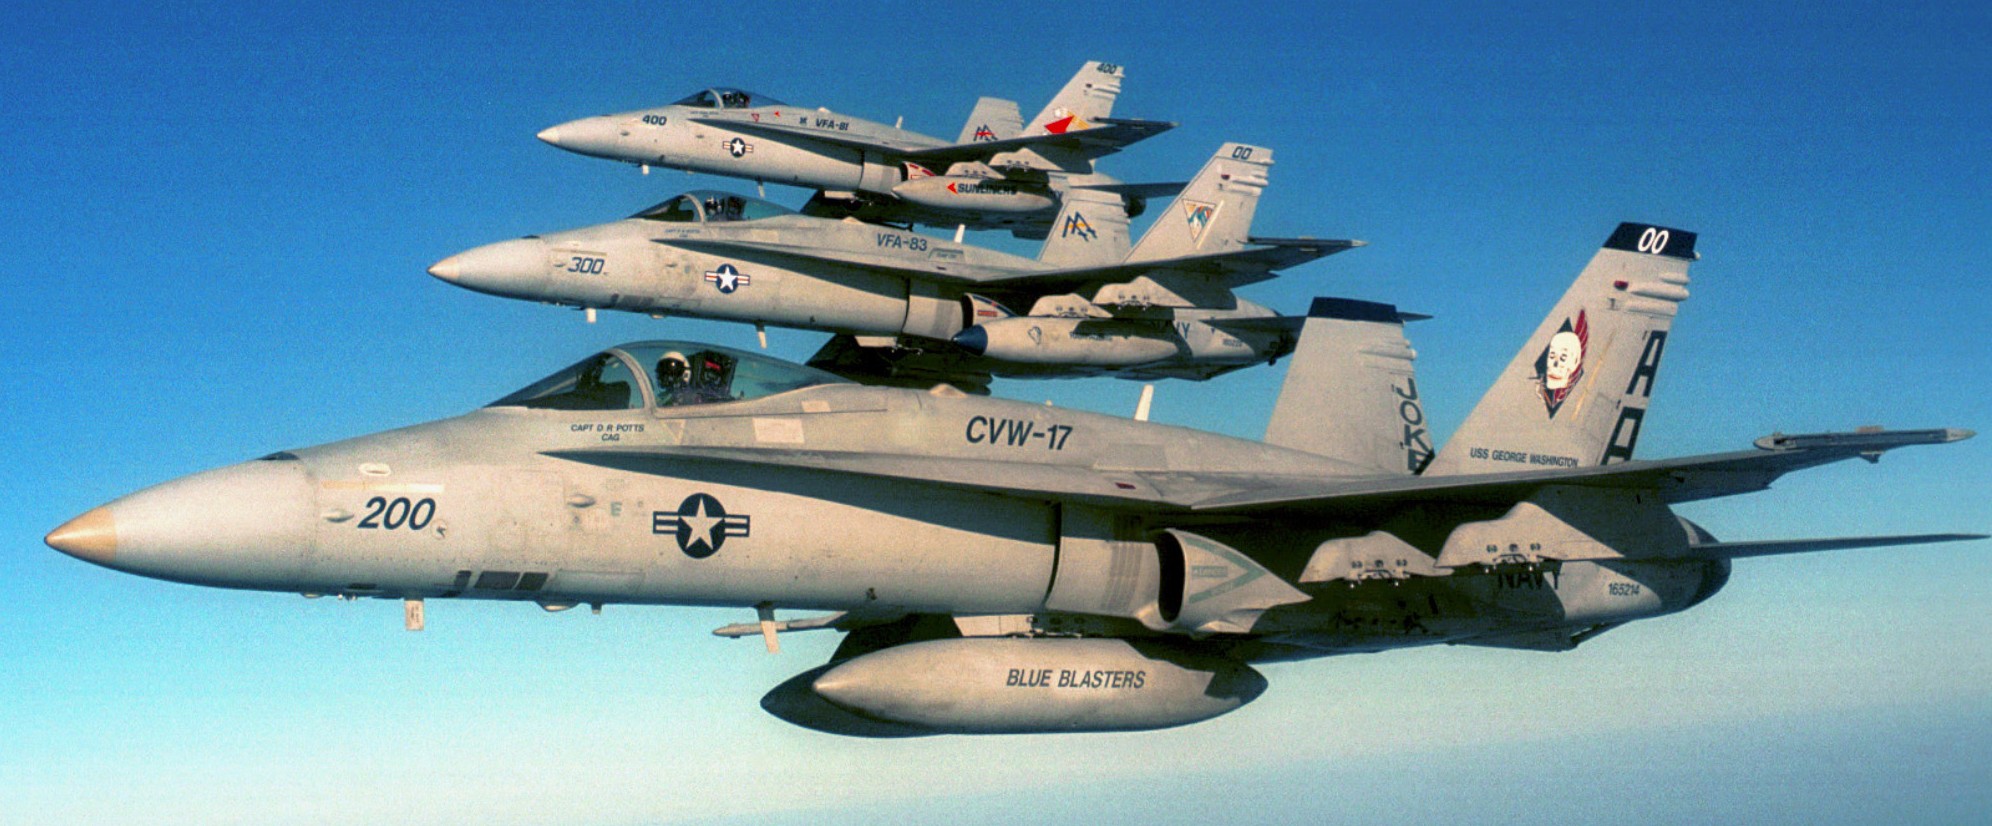 vfa-34 blue blasters f/a-18c hornet carrier air wing cvw-17